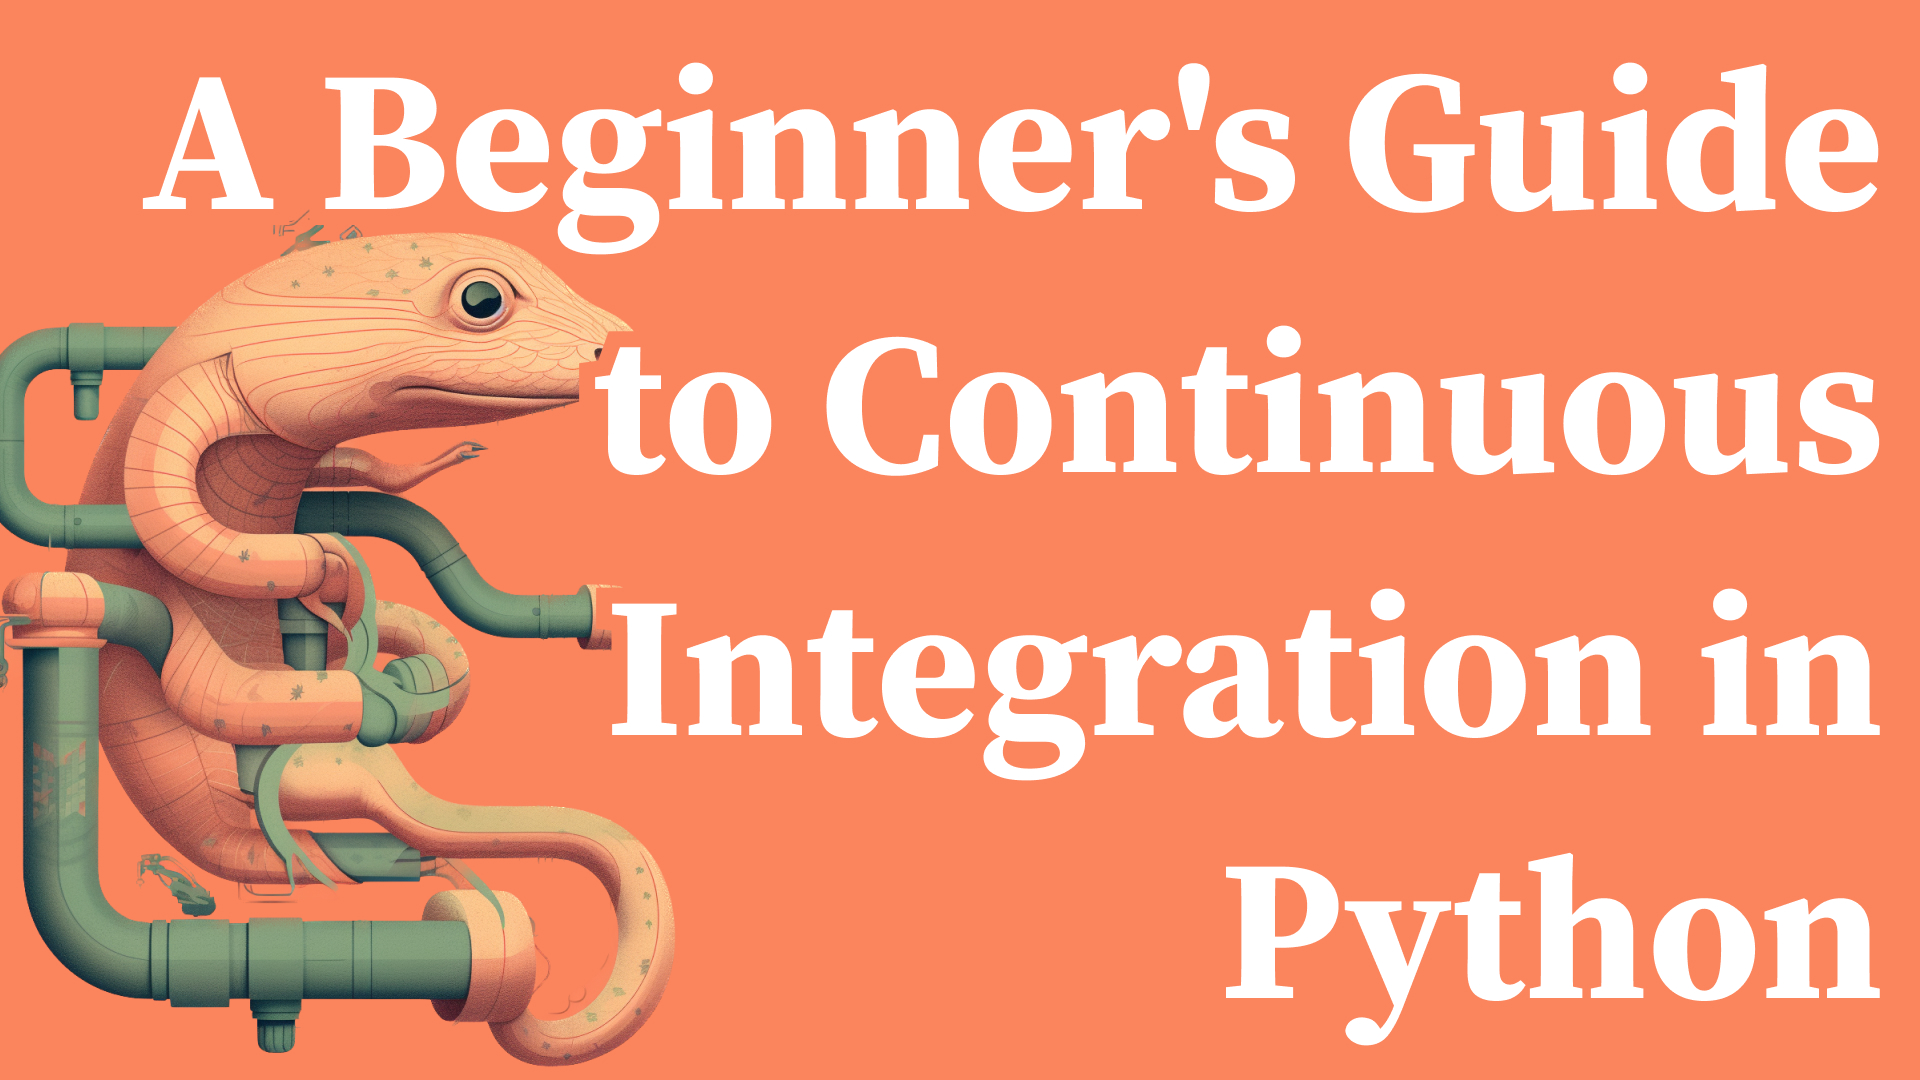 A Beginner's Guide to Continuous Integration in Python